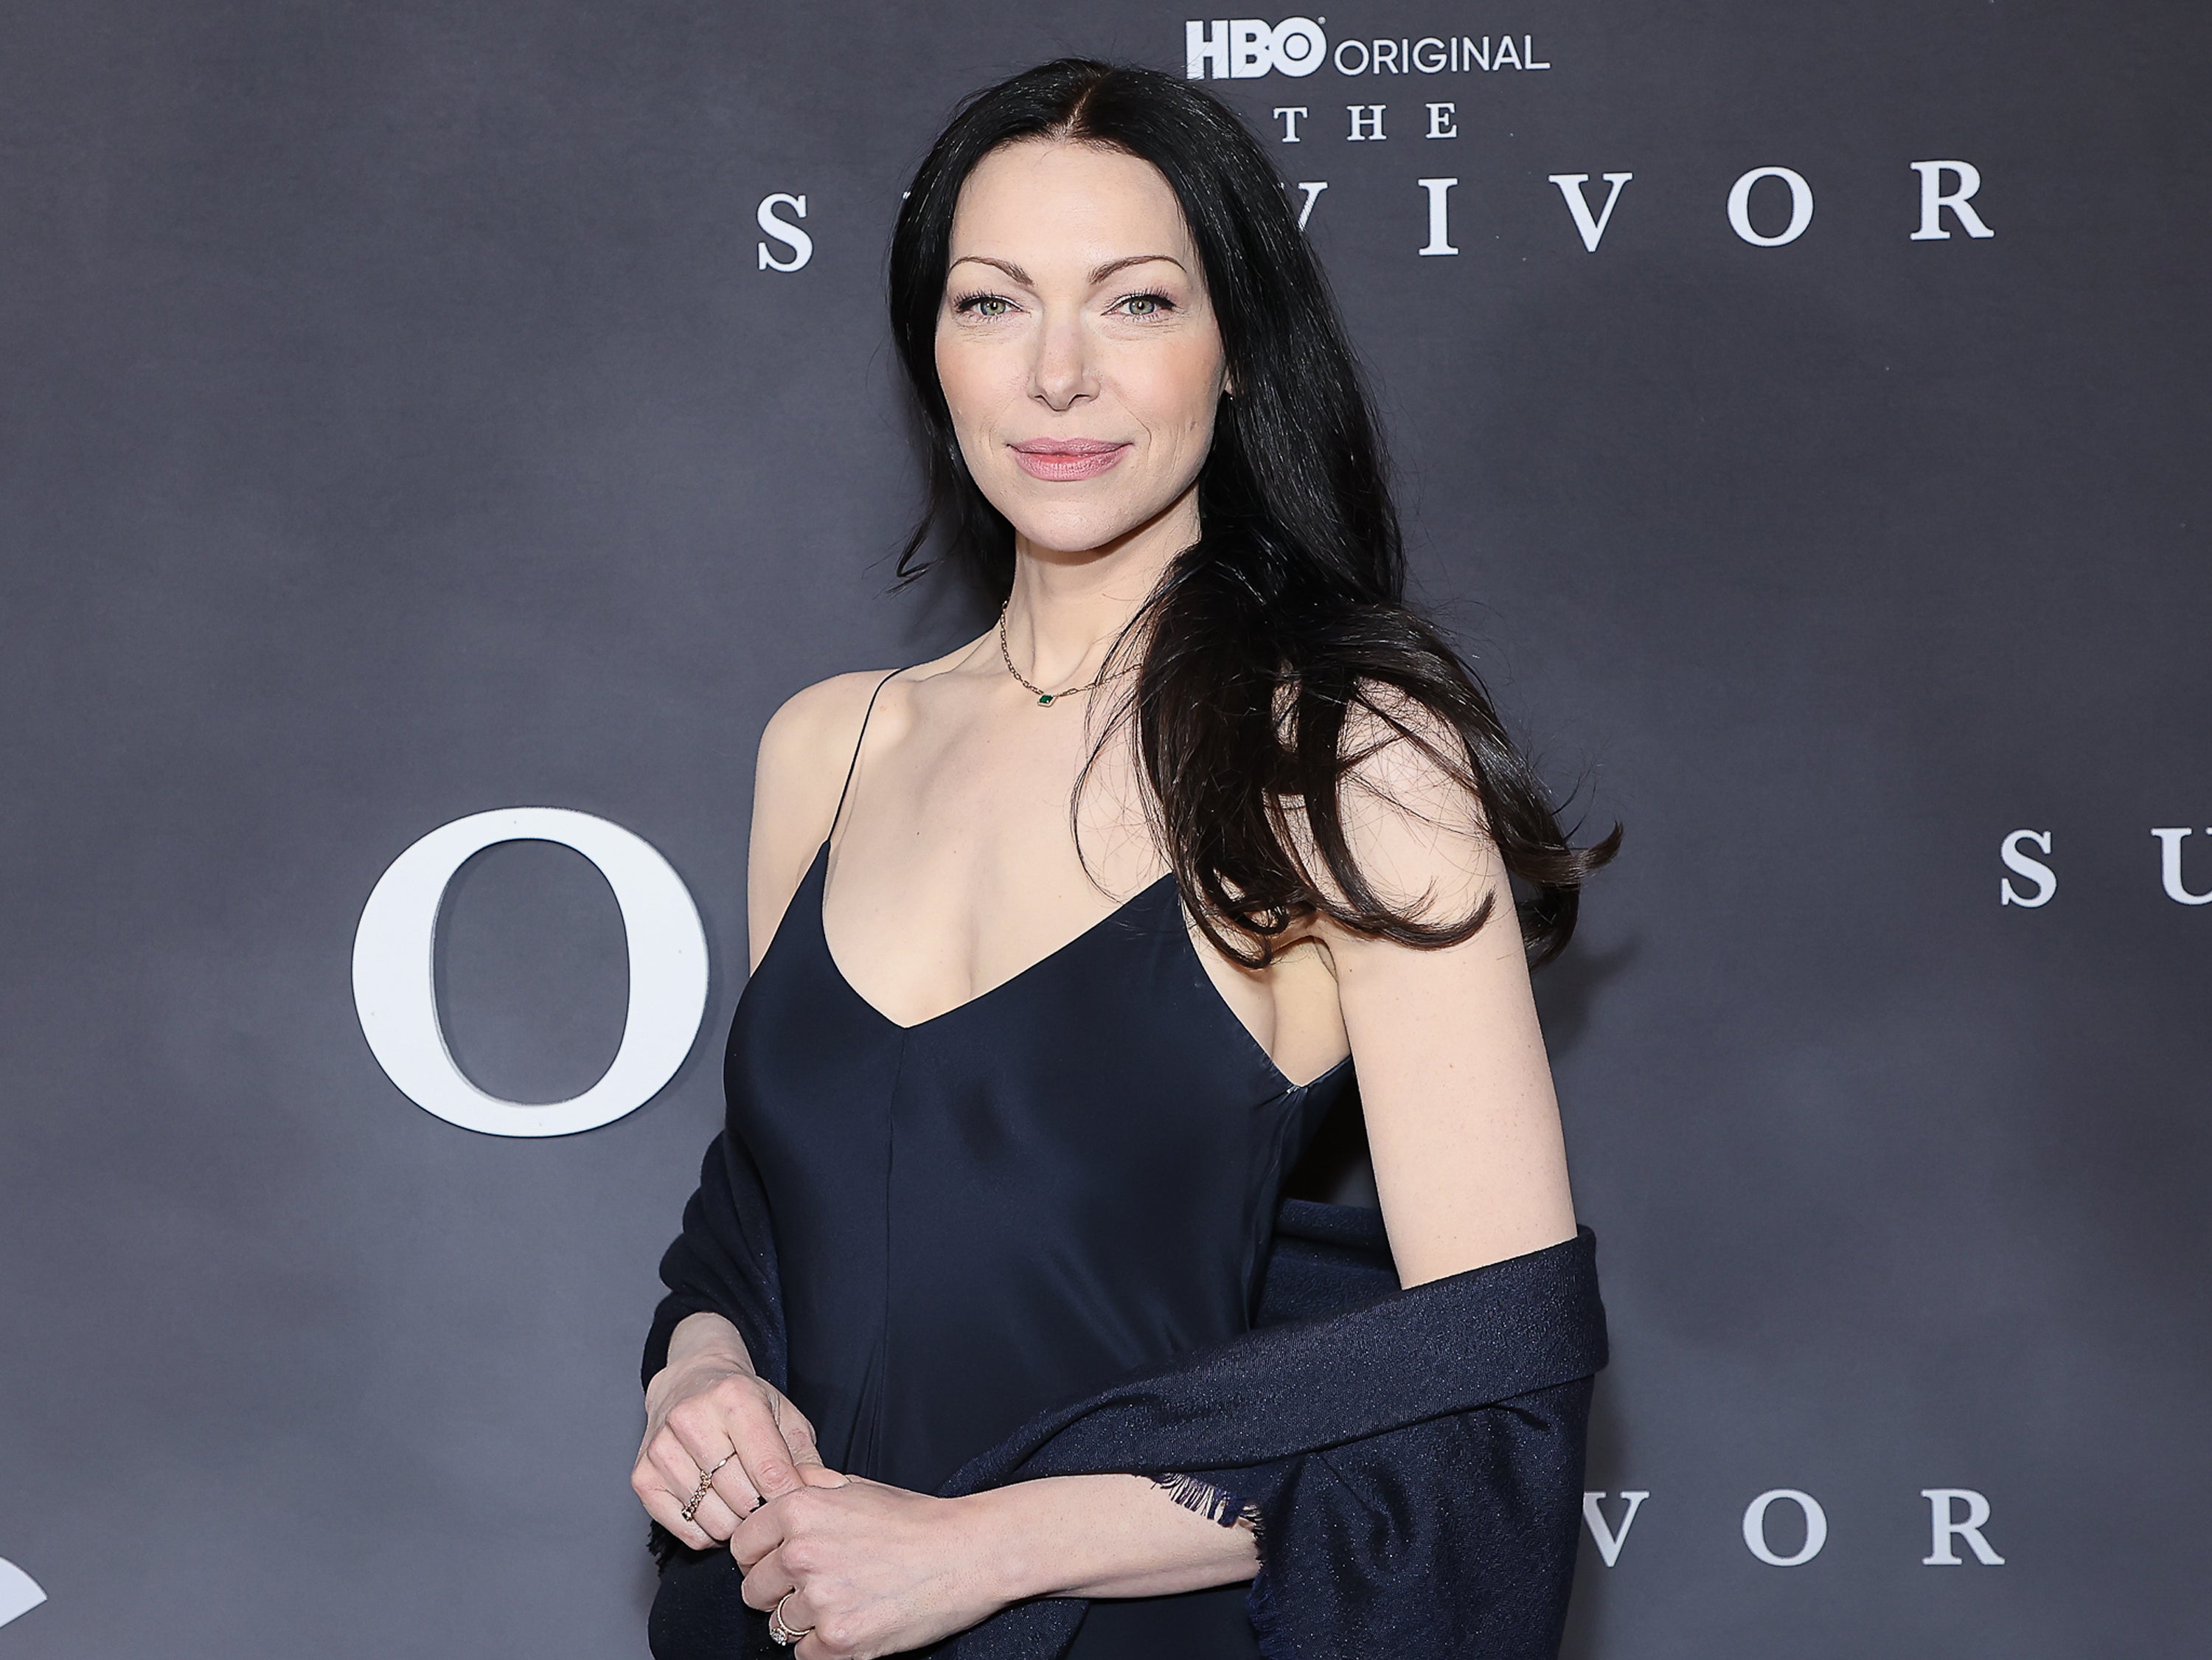 Laura Prepon had an abortion after finding out her baby would not survive to full term